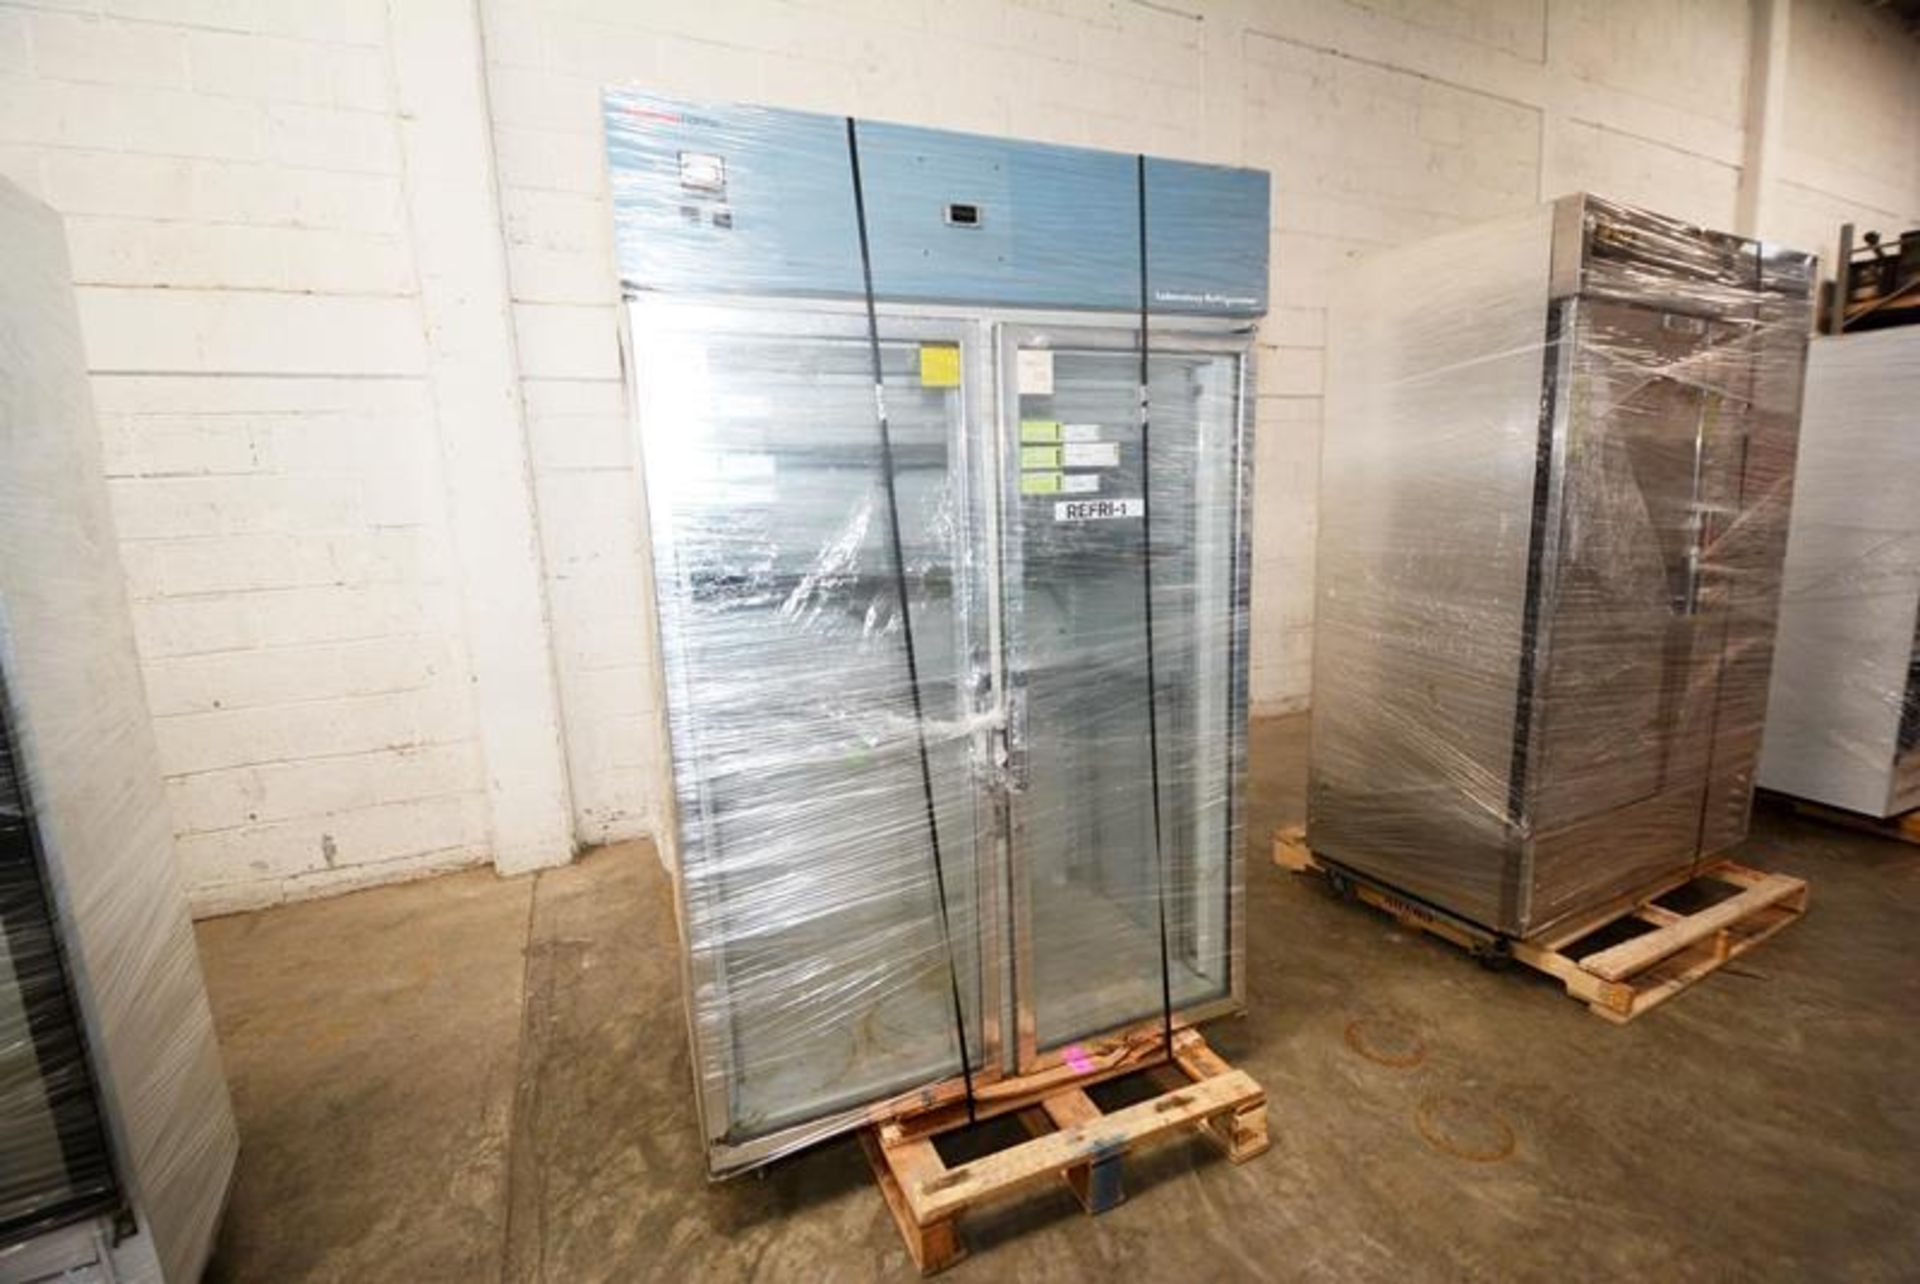 Refrigerator used to keep samples at the QC and testing lab. Located in Cd. Juarez.  Refrigerador - Image 8 of 14